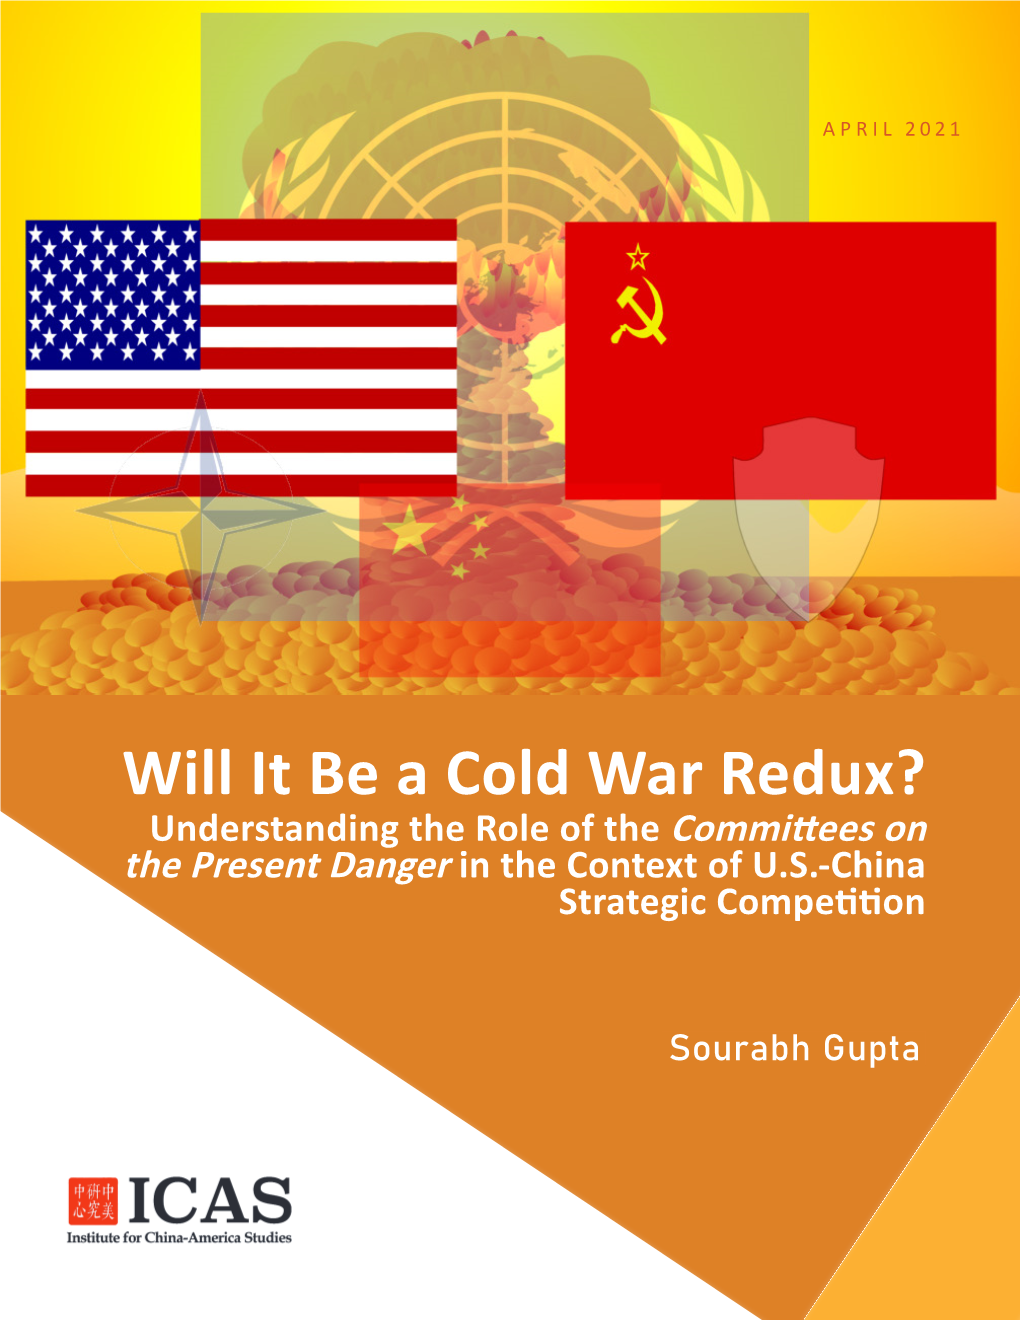 Will It Be a Cold War Redux? Understanding the Role of the Committees on the Present Danger in the Context of U.S.-China Strategic Competition